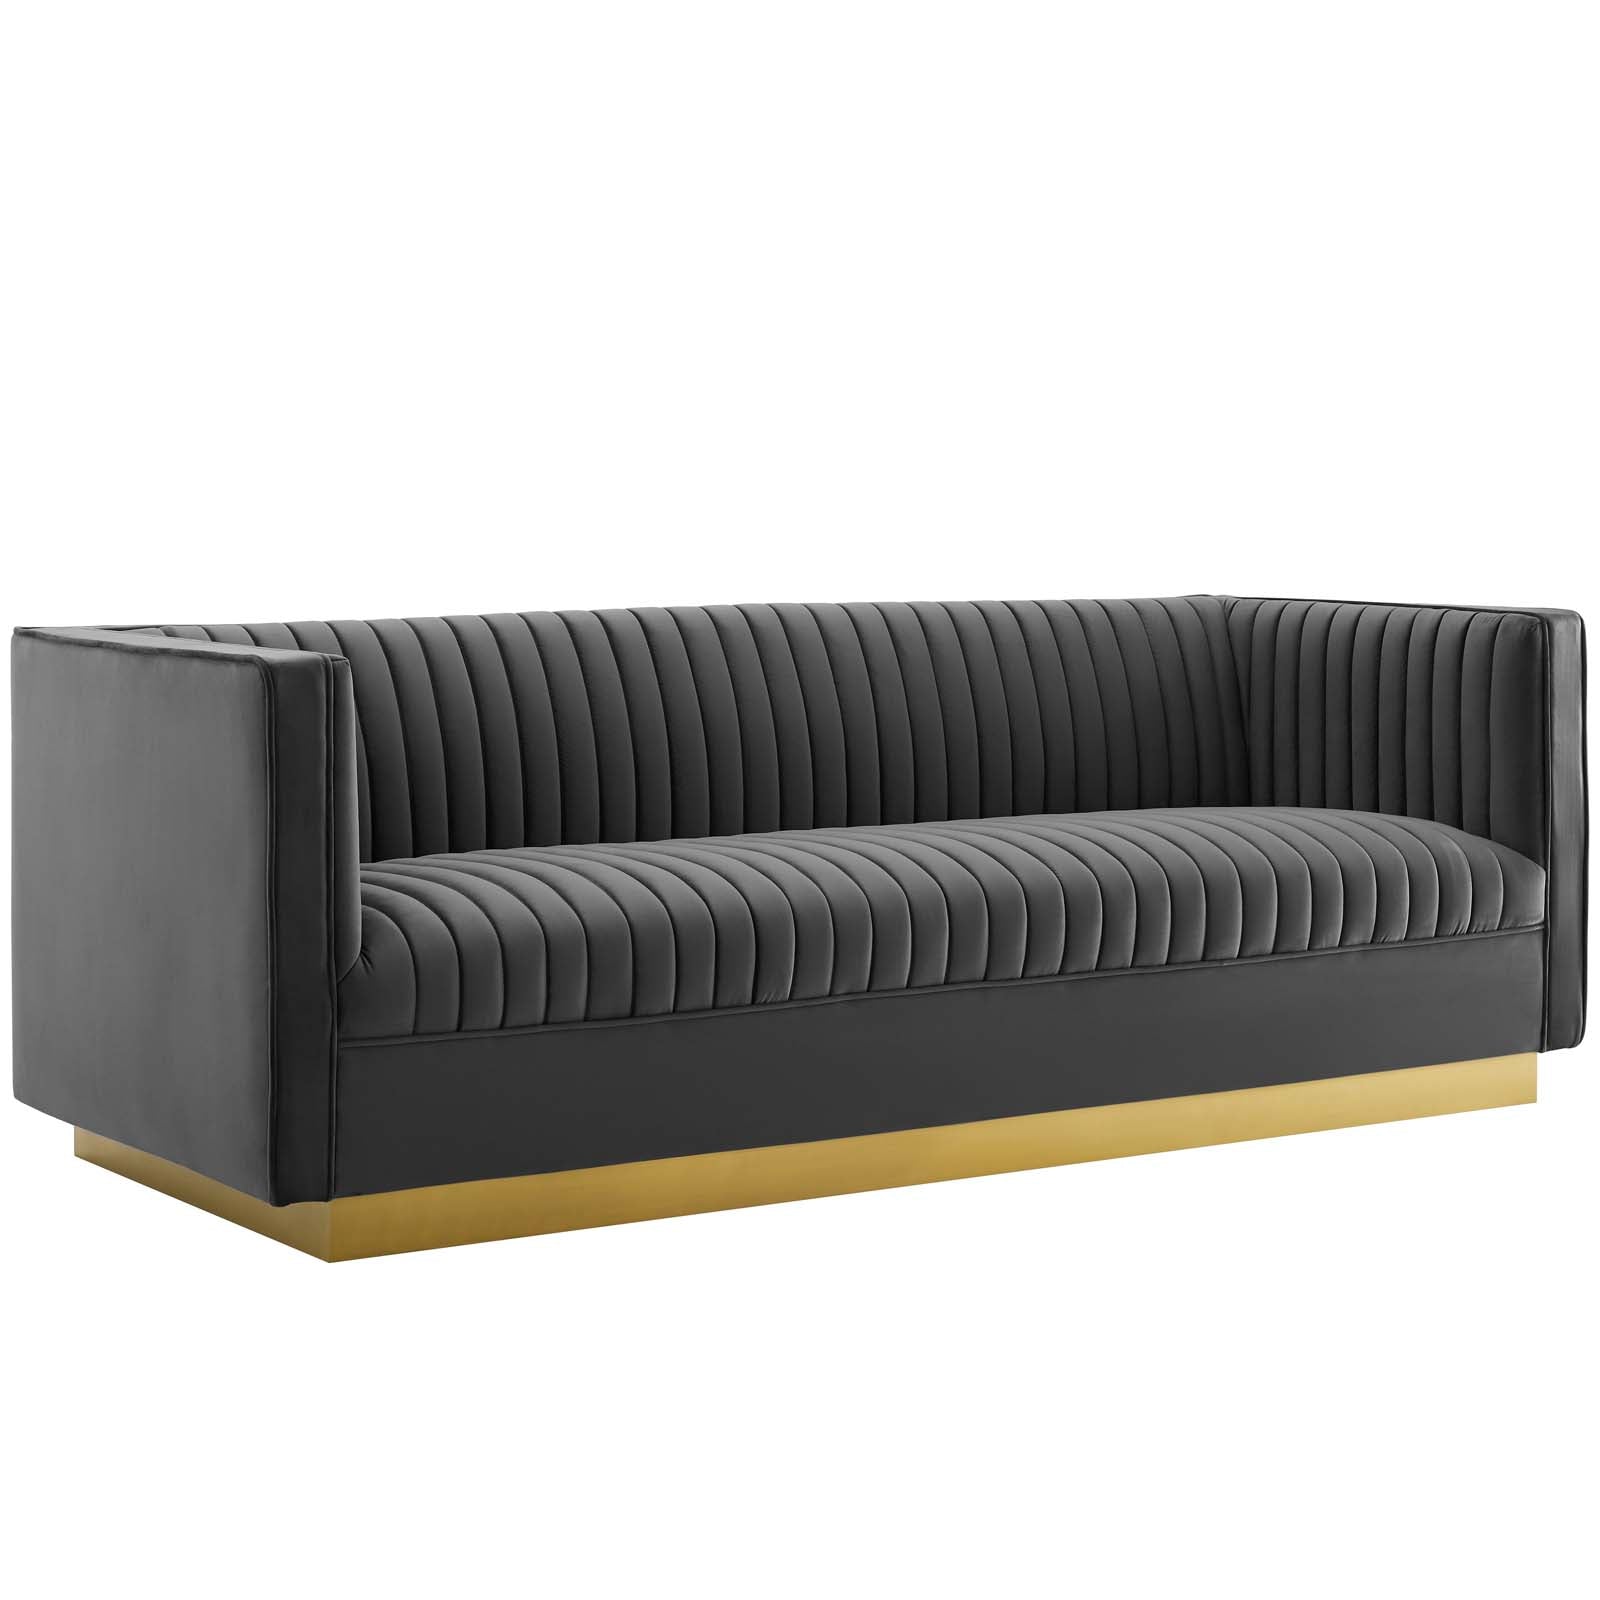 Modway Sofas & Couches - Sanguine Vertical Channel Tufted Performance Velvet Sofa Gray